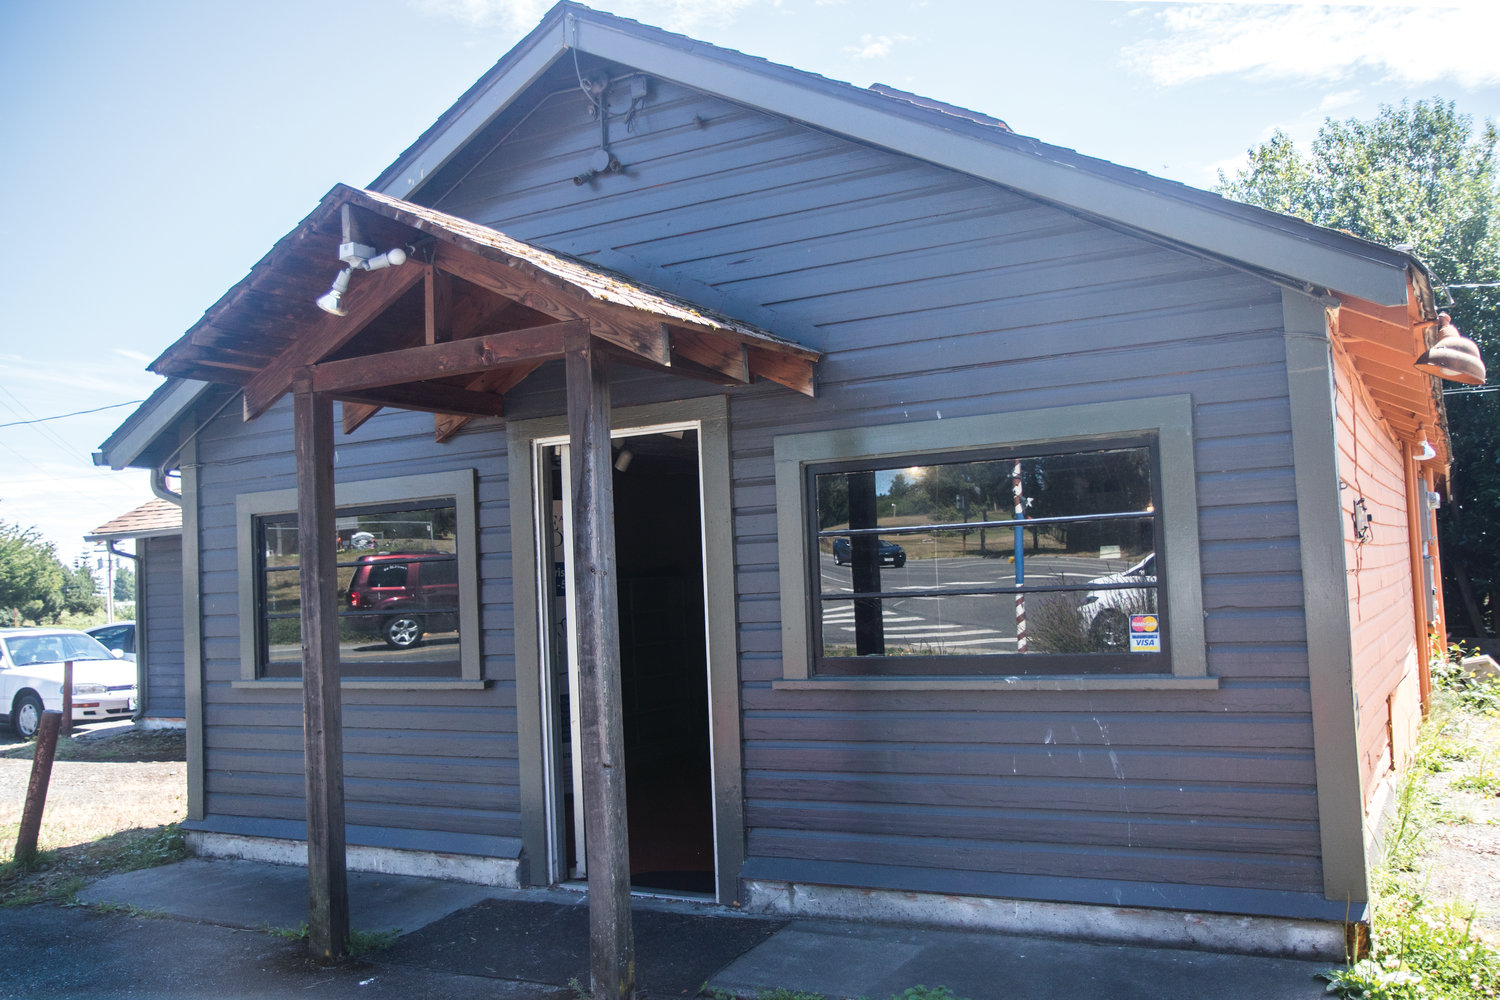 The building at 939 Kearney Street in Port Townsend was the home of Candace’s Cookies for many years. Now, it is planned to be a Recovery Cafe, to support those in recovery from substance abuse, homelessness, mental illness and trauma.